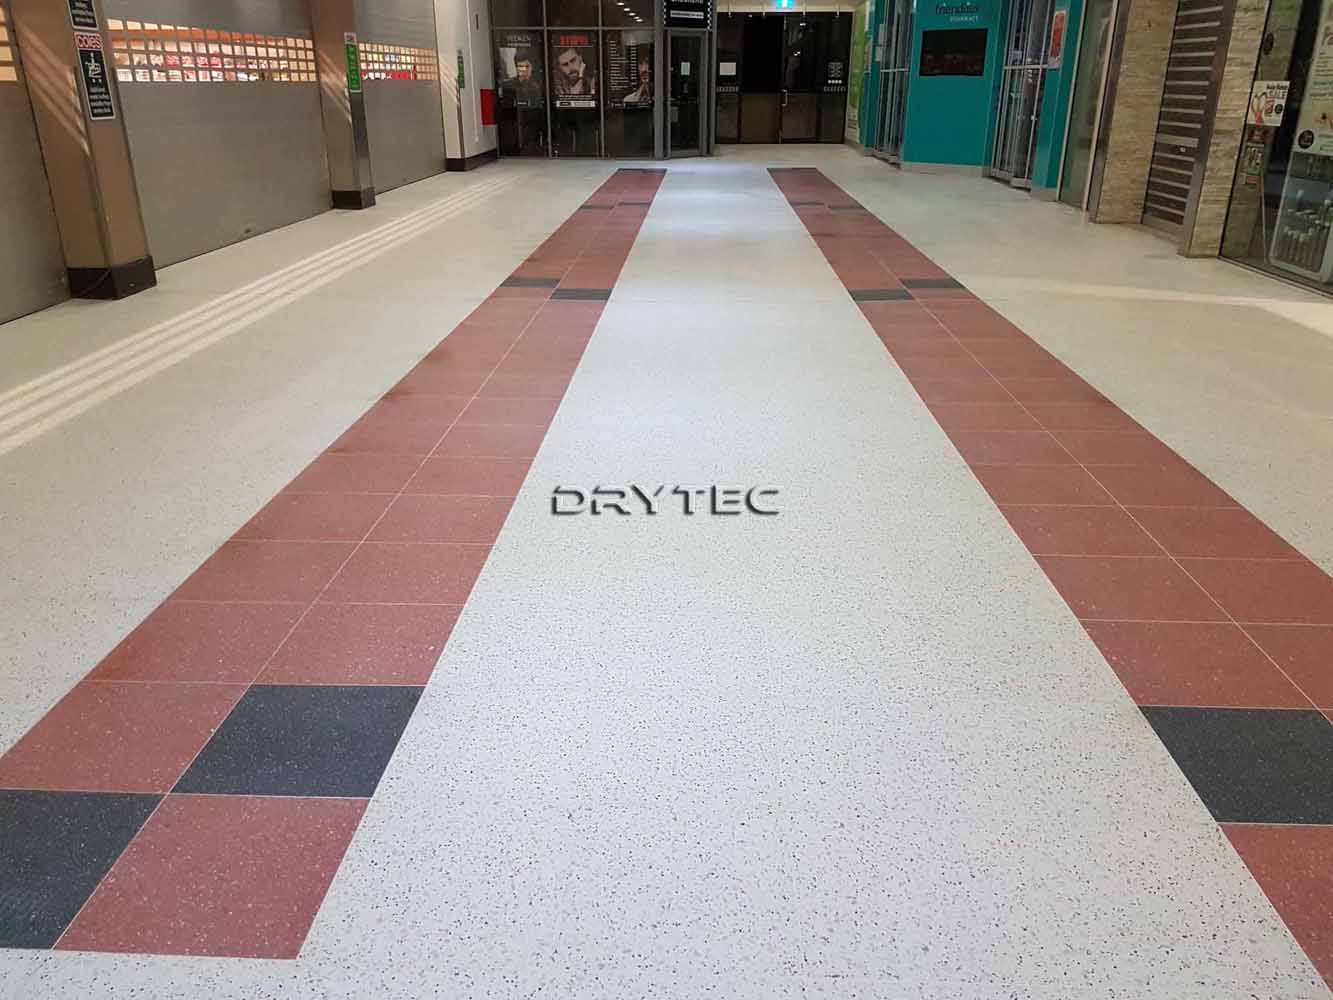 Terrazzo Floor Tiles Restoration-Grinding-Honing-Polishing-Cleaning and Sealing Service in Perth